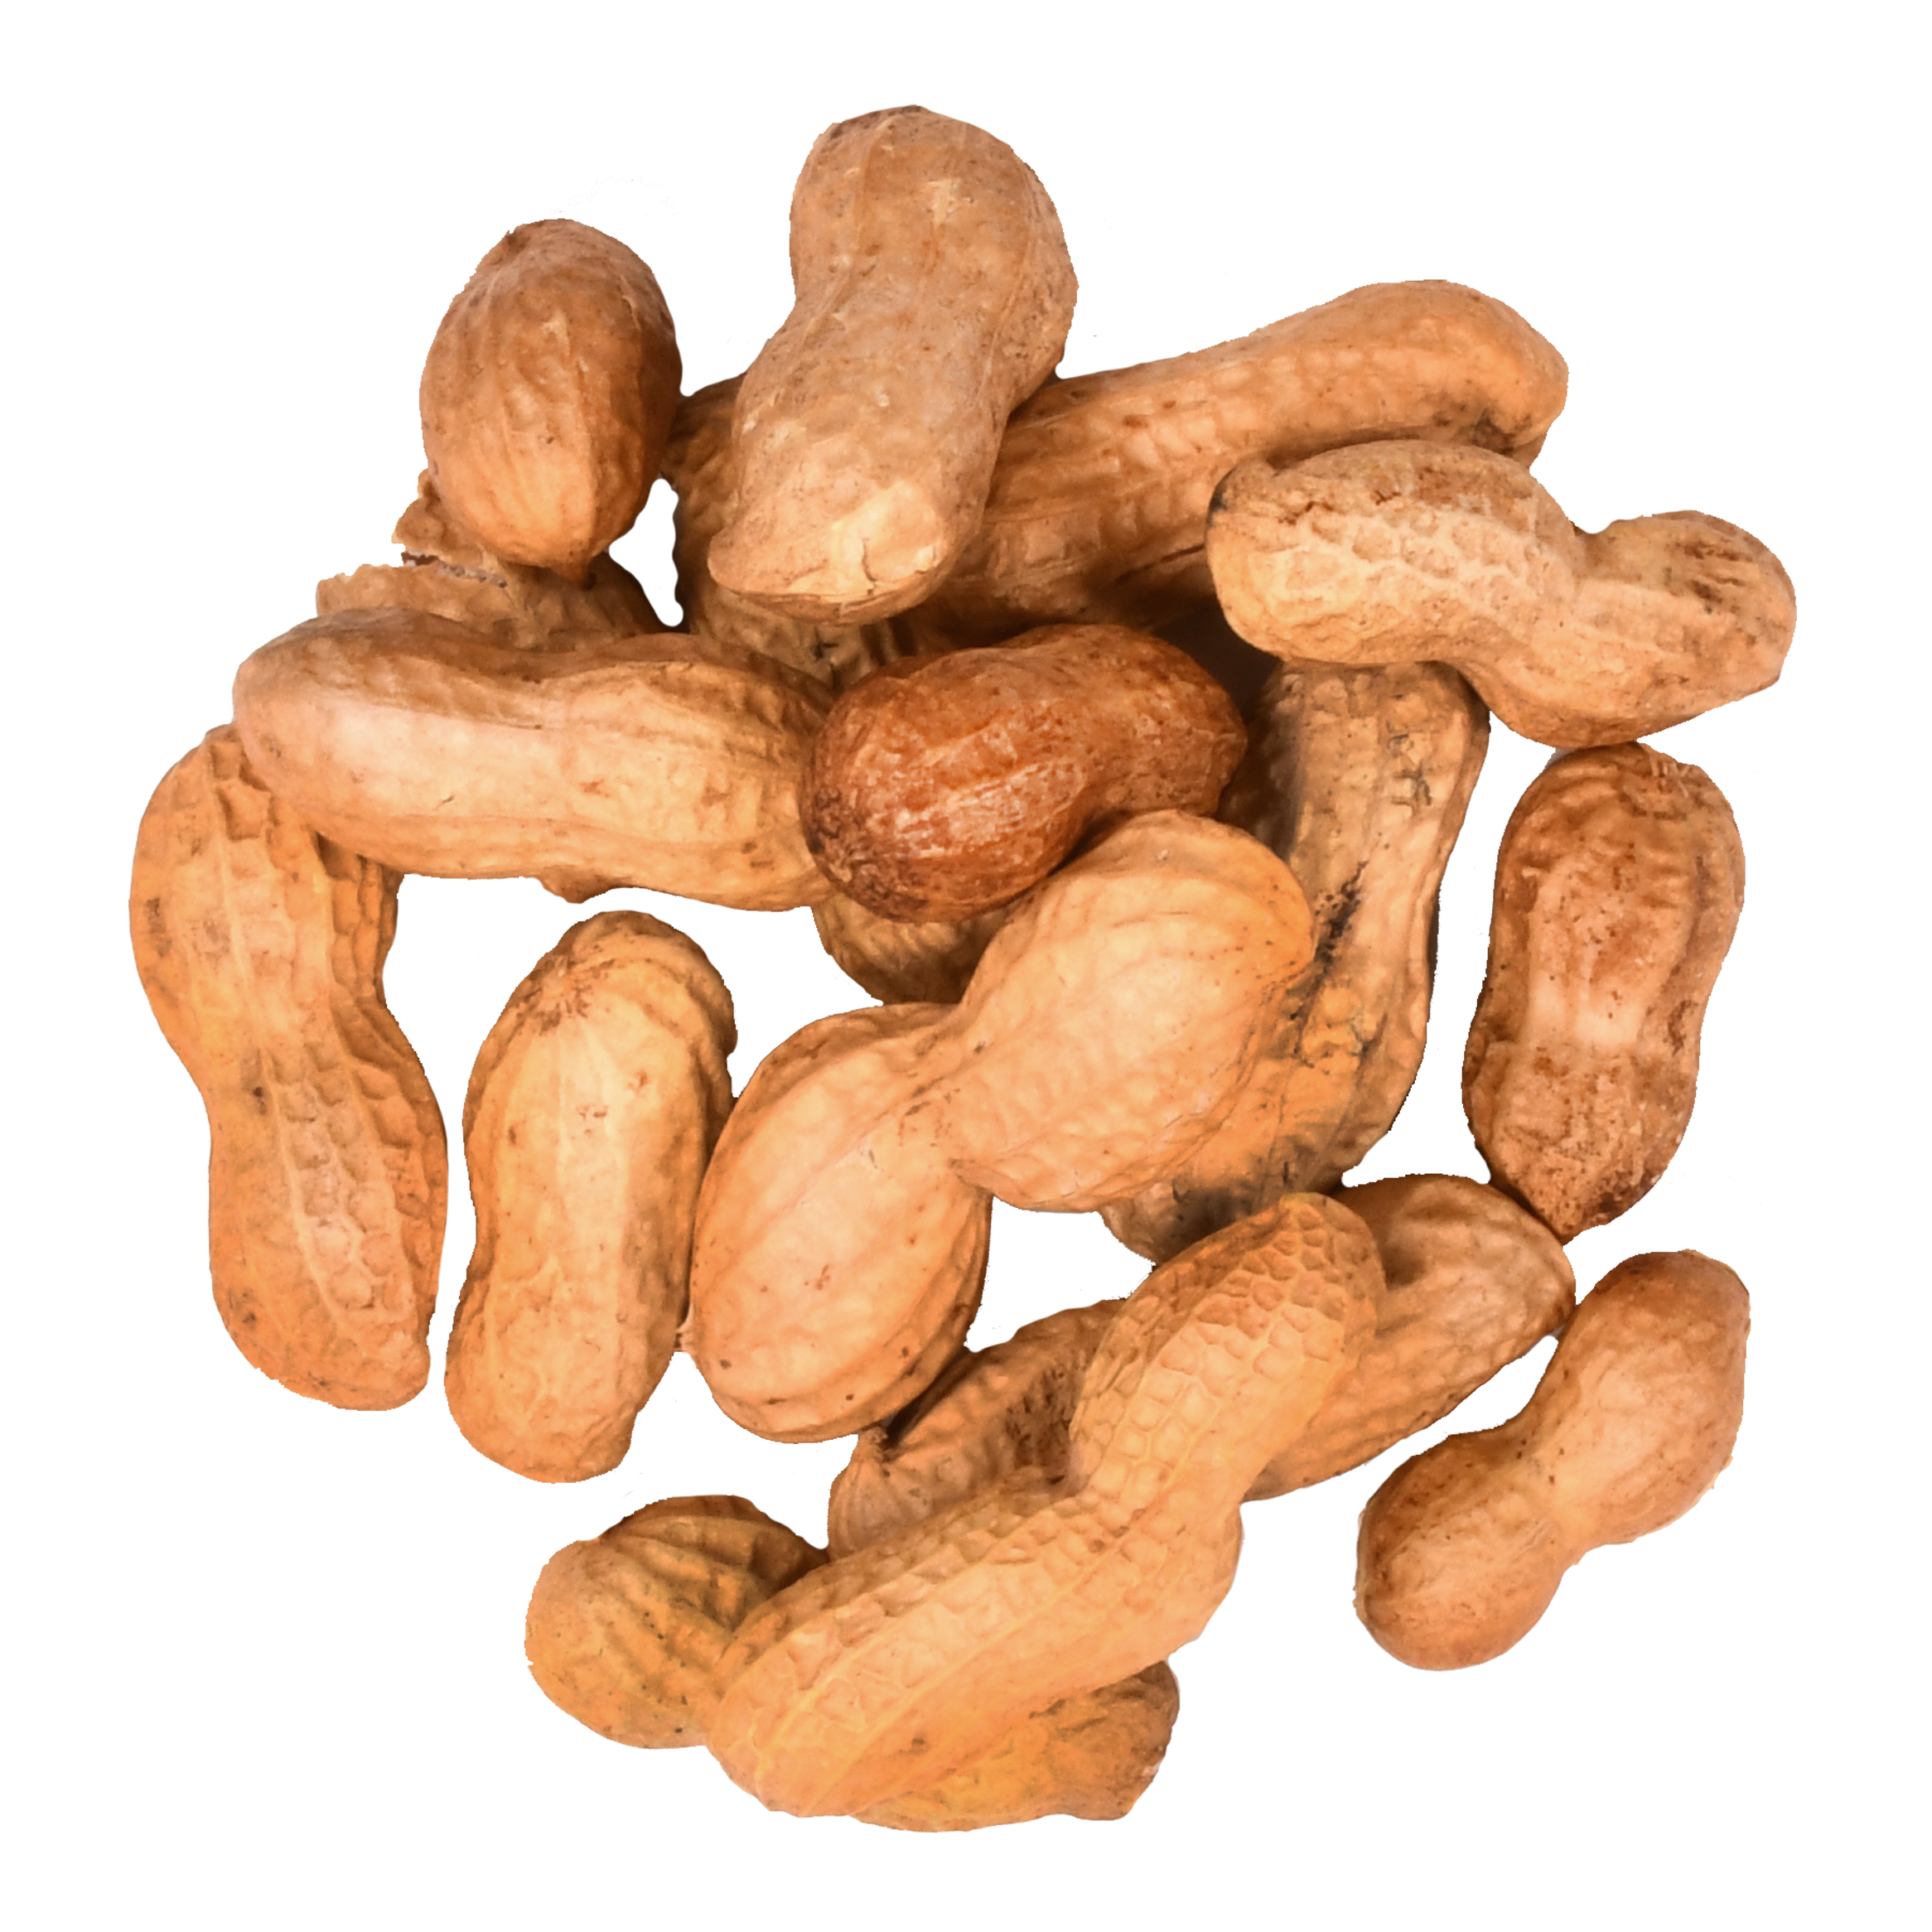 Peanuts In The Shell